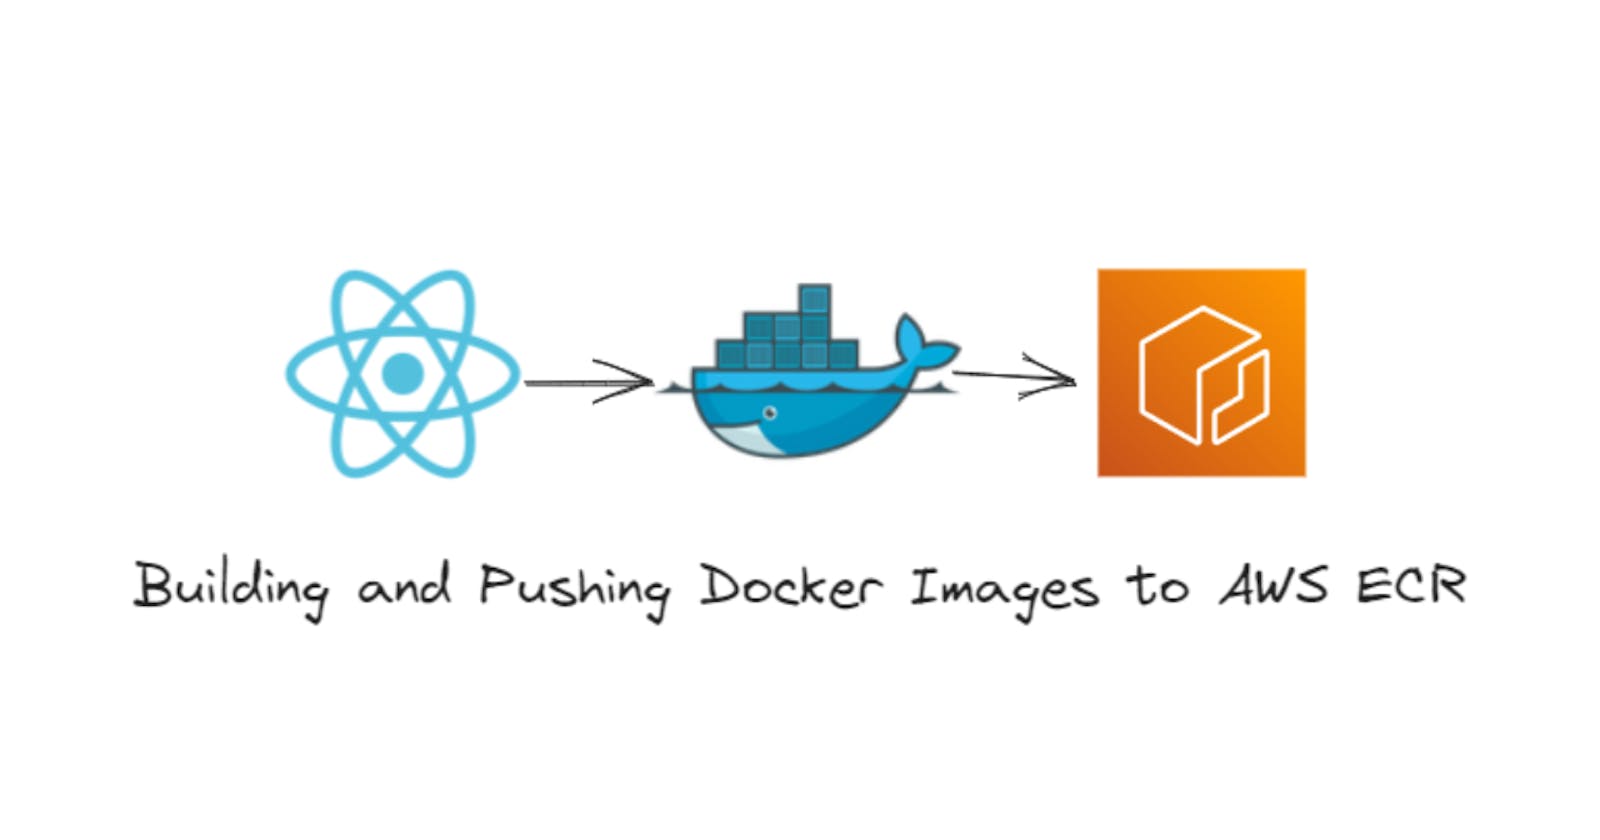 Building and Pushing Docker Images to AWS ECR for Seamless Deployment